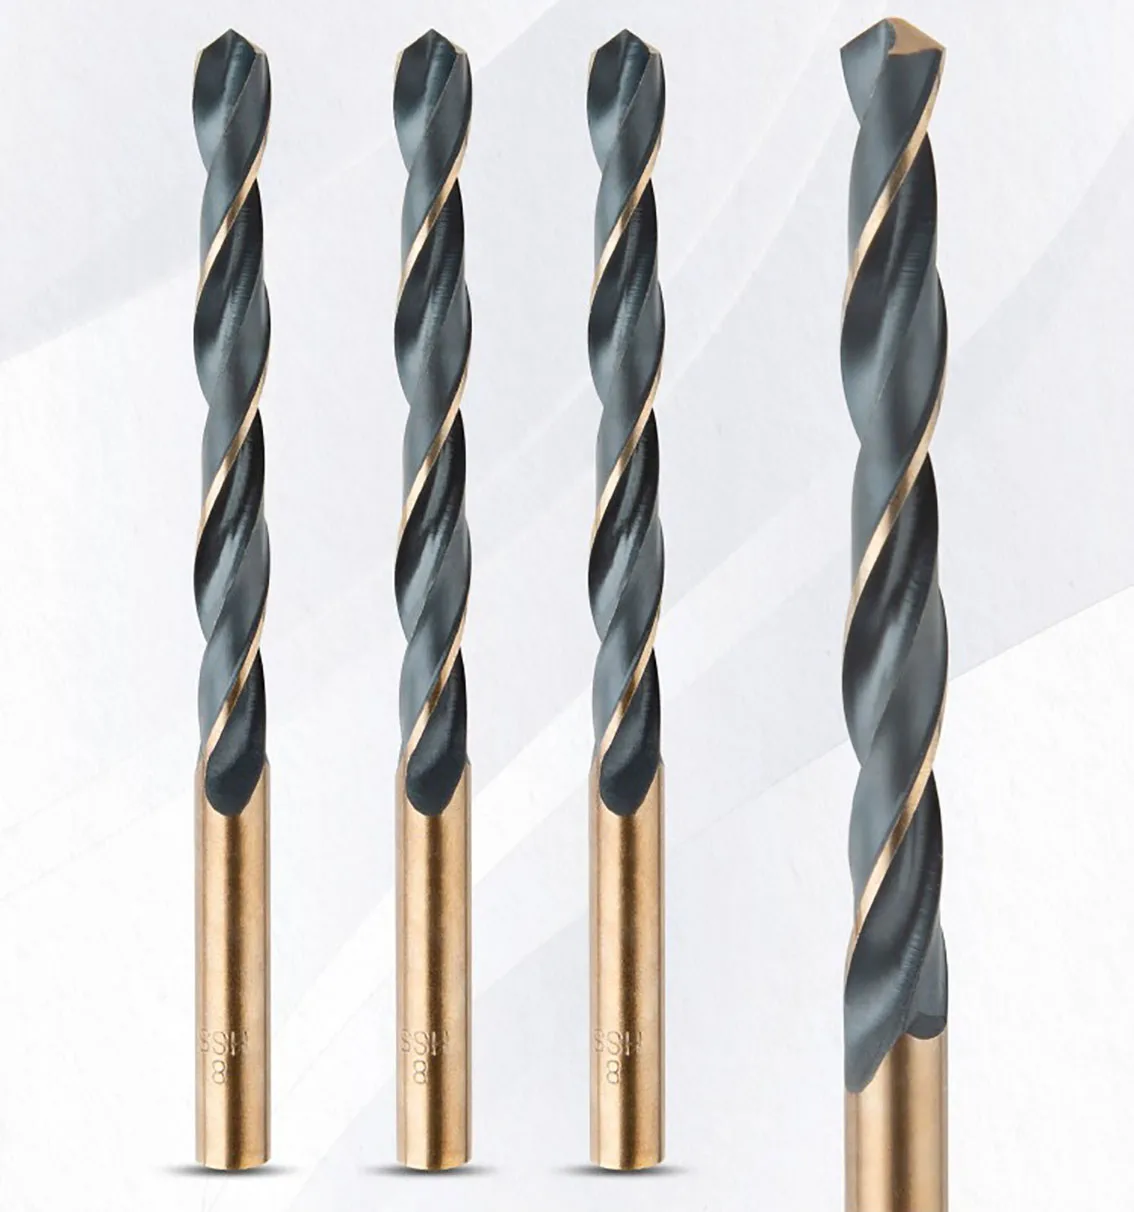 

1-14mm HSS Twist Drill Bit Round Straight Shank Drill Bit For Metal Stainless Steel/Iron/Copper/Aluminum Drilling Hole Tools